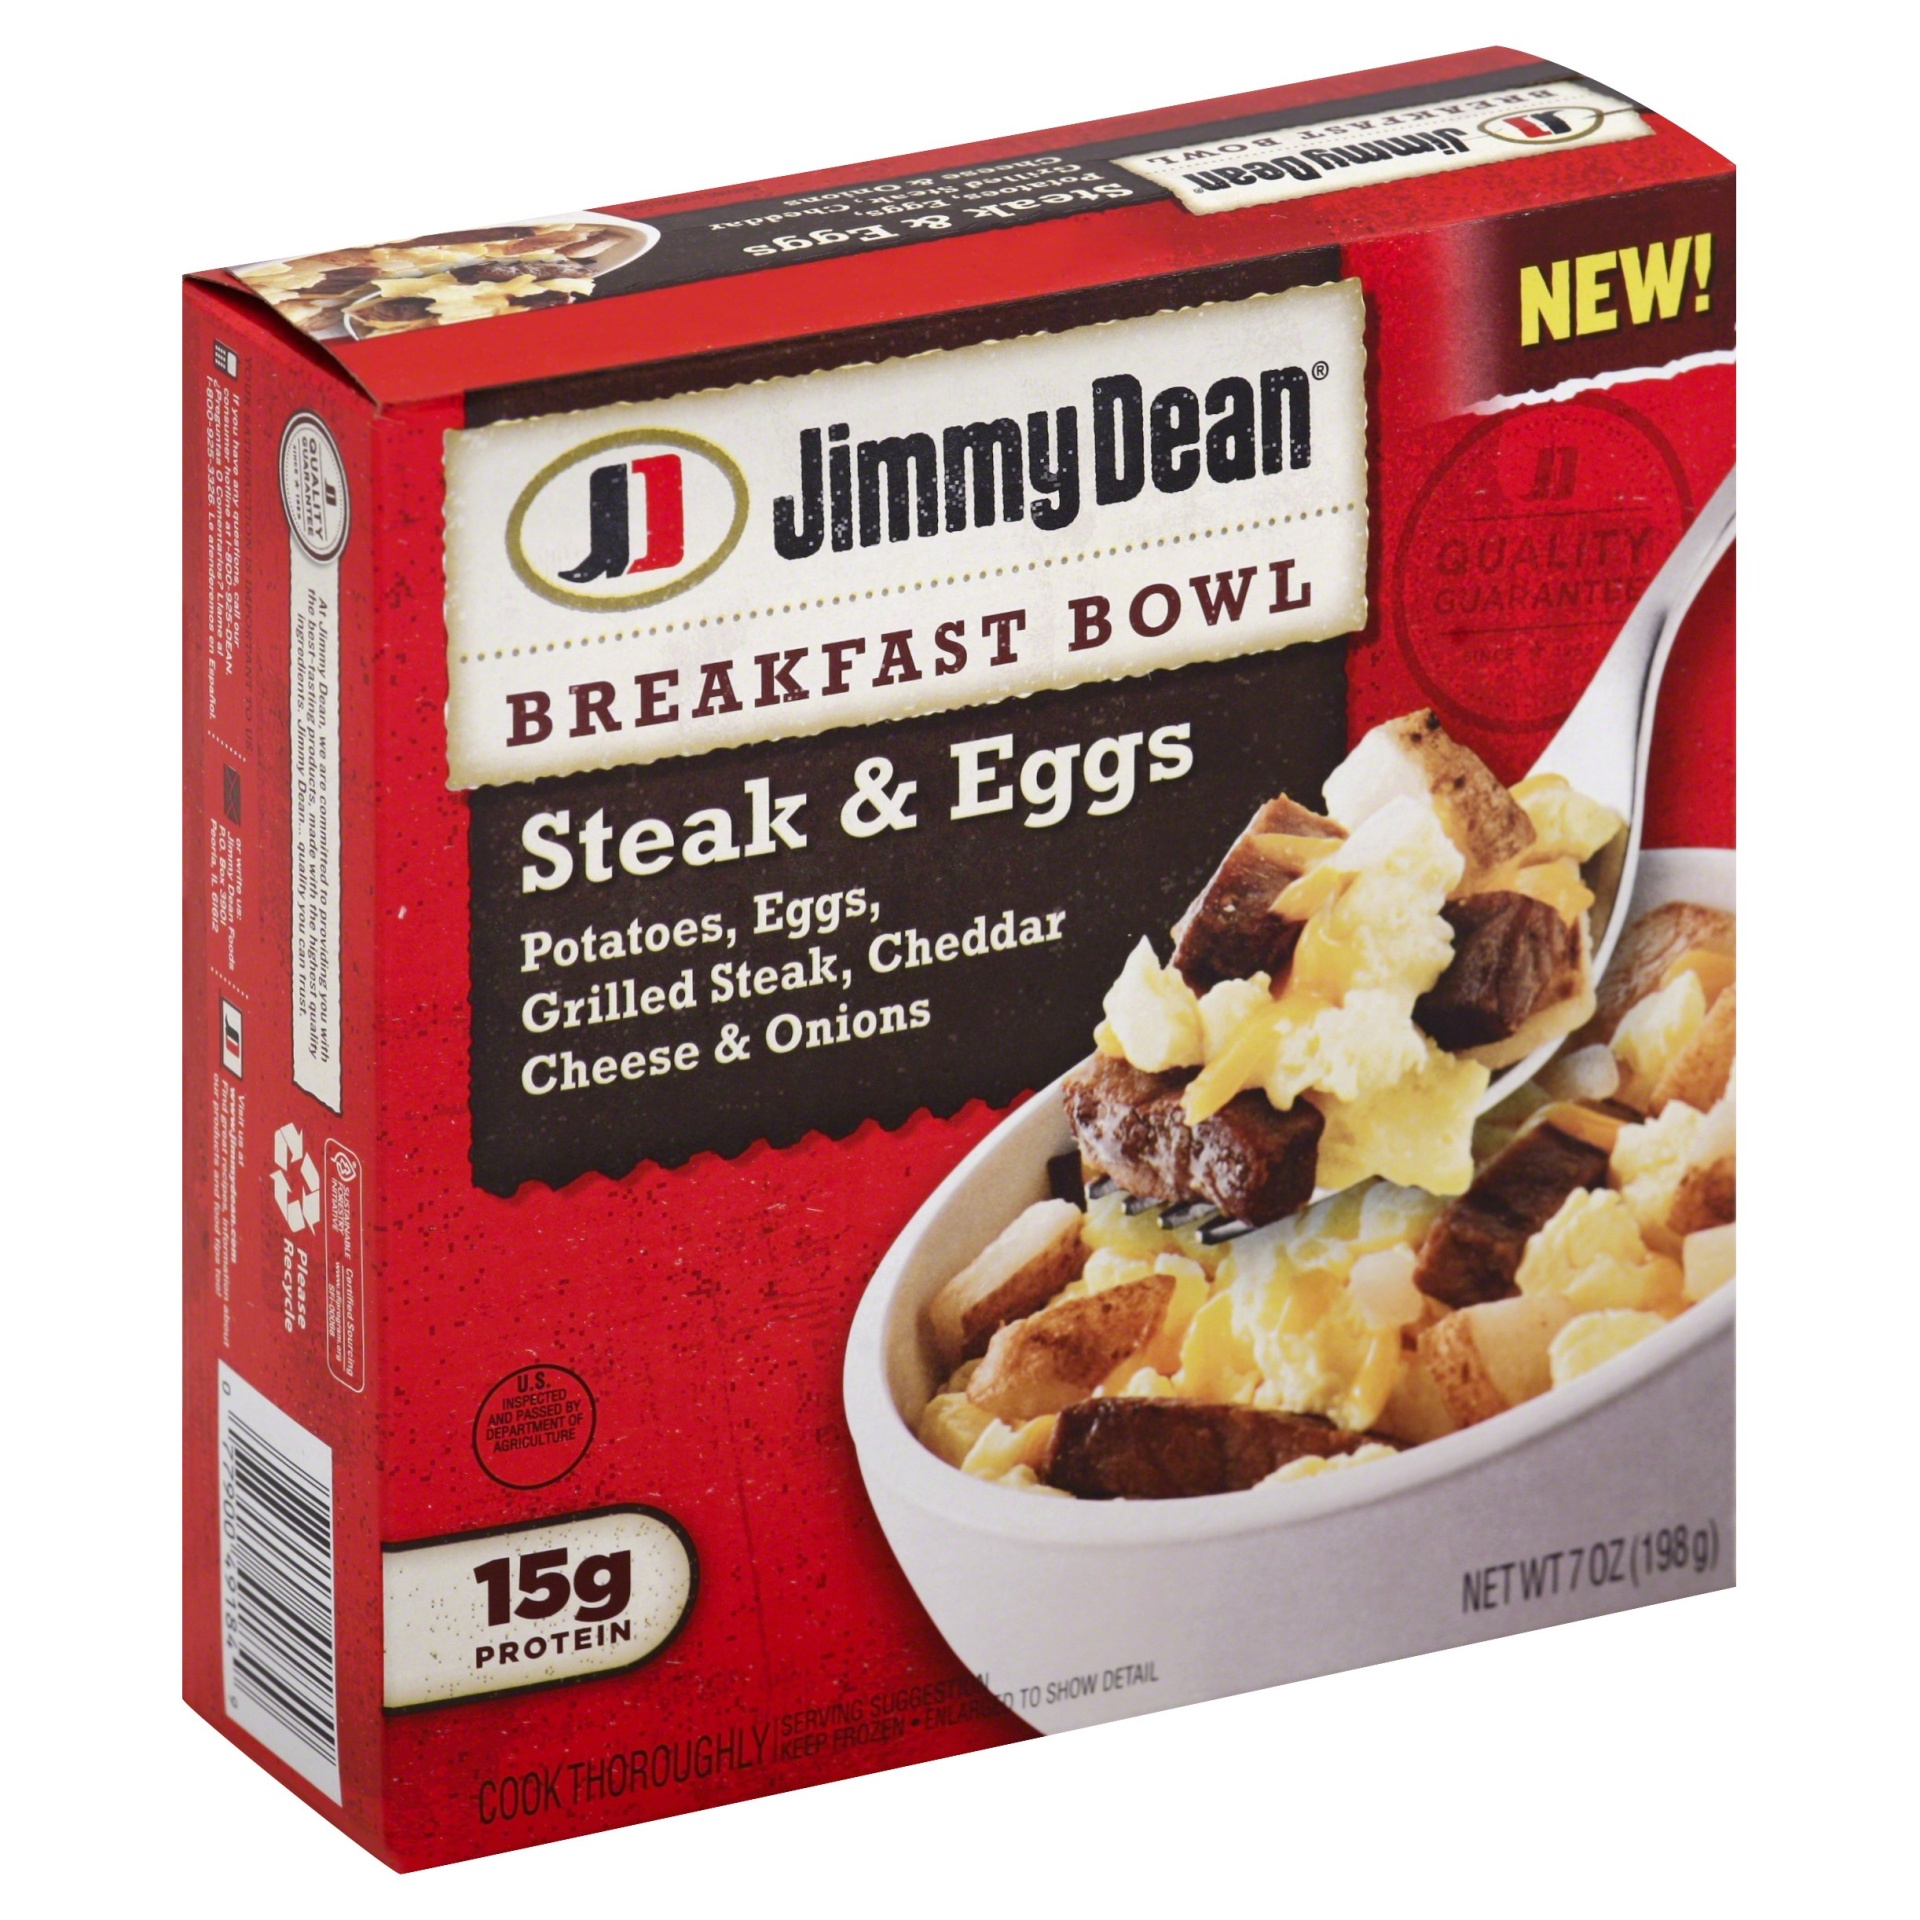 How To Cook Jimmy Dean Breakfast Bowl In Oven